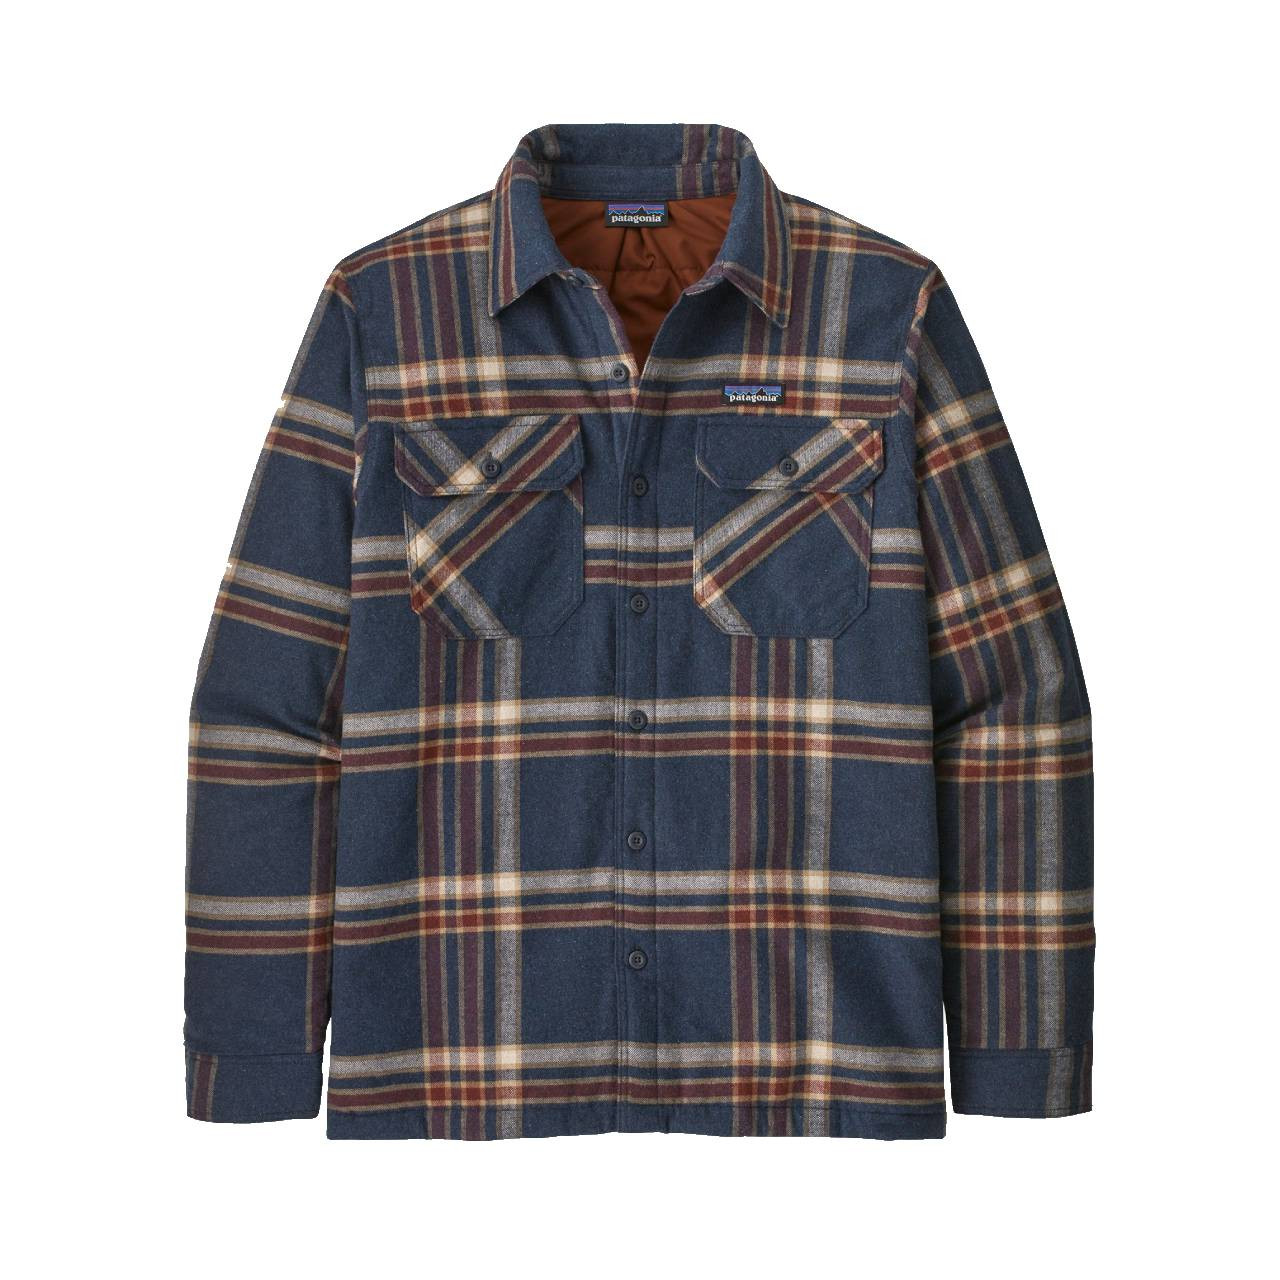 Patagonia M's Insulated Organic Cotton MW Fjord Flannel Shirt - Growlers Plaid:Smolder Blue - Large